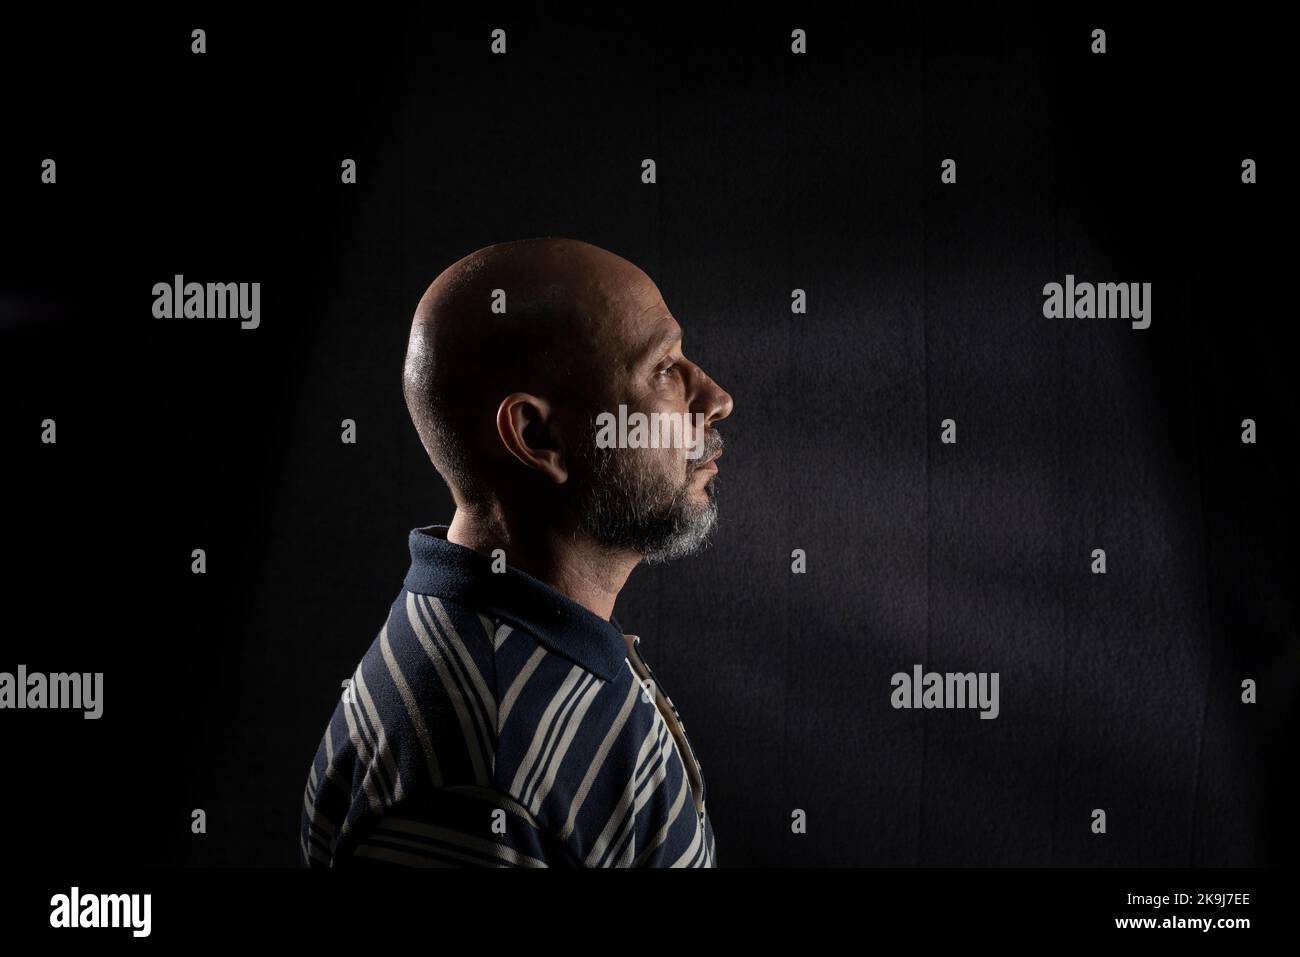 Young handsome bald man with beard wearing casual shirt over black background. Thinking worried. Thoughtful. Stock Photo